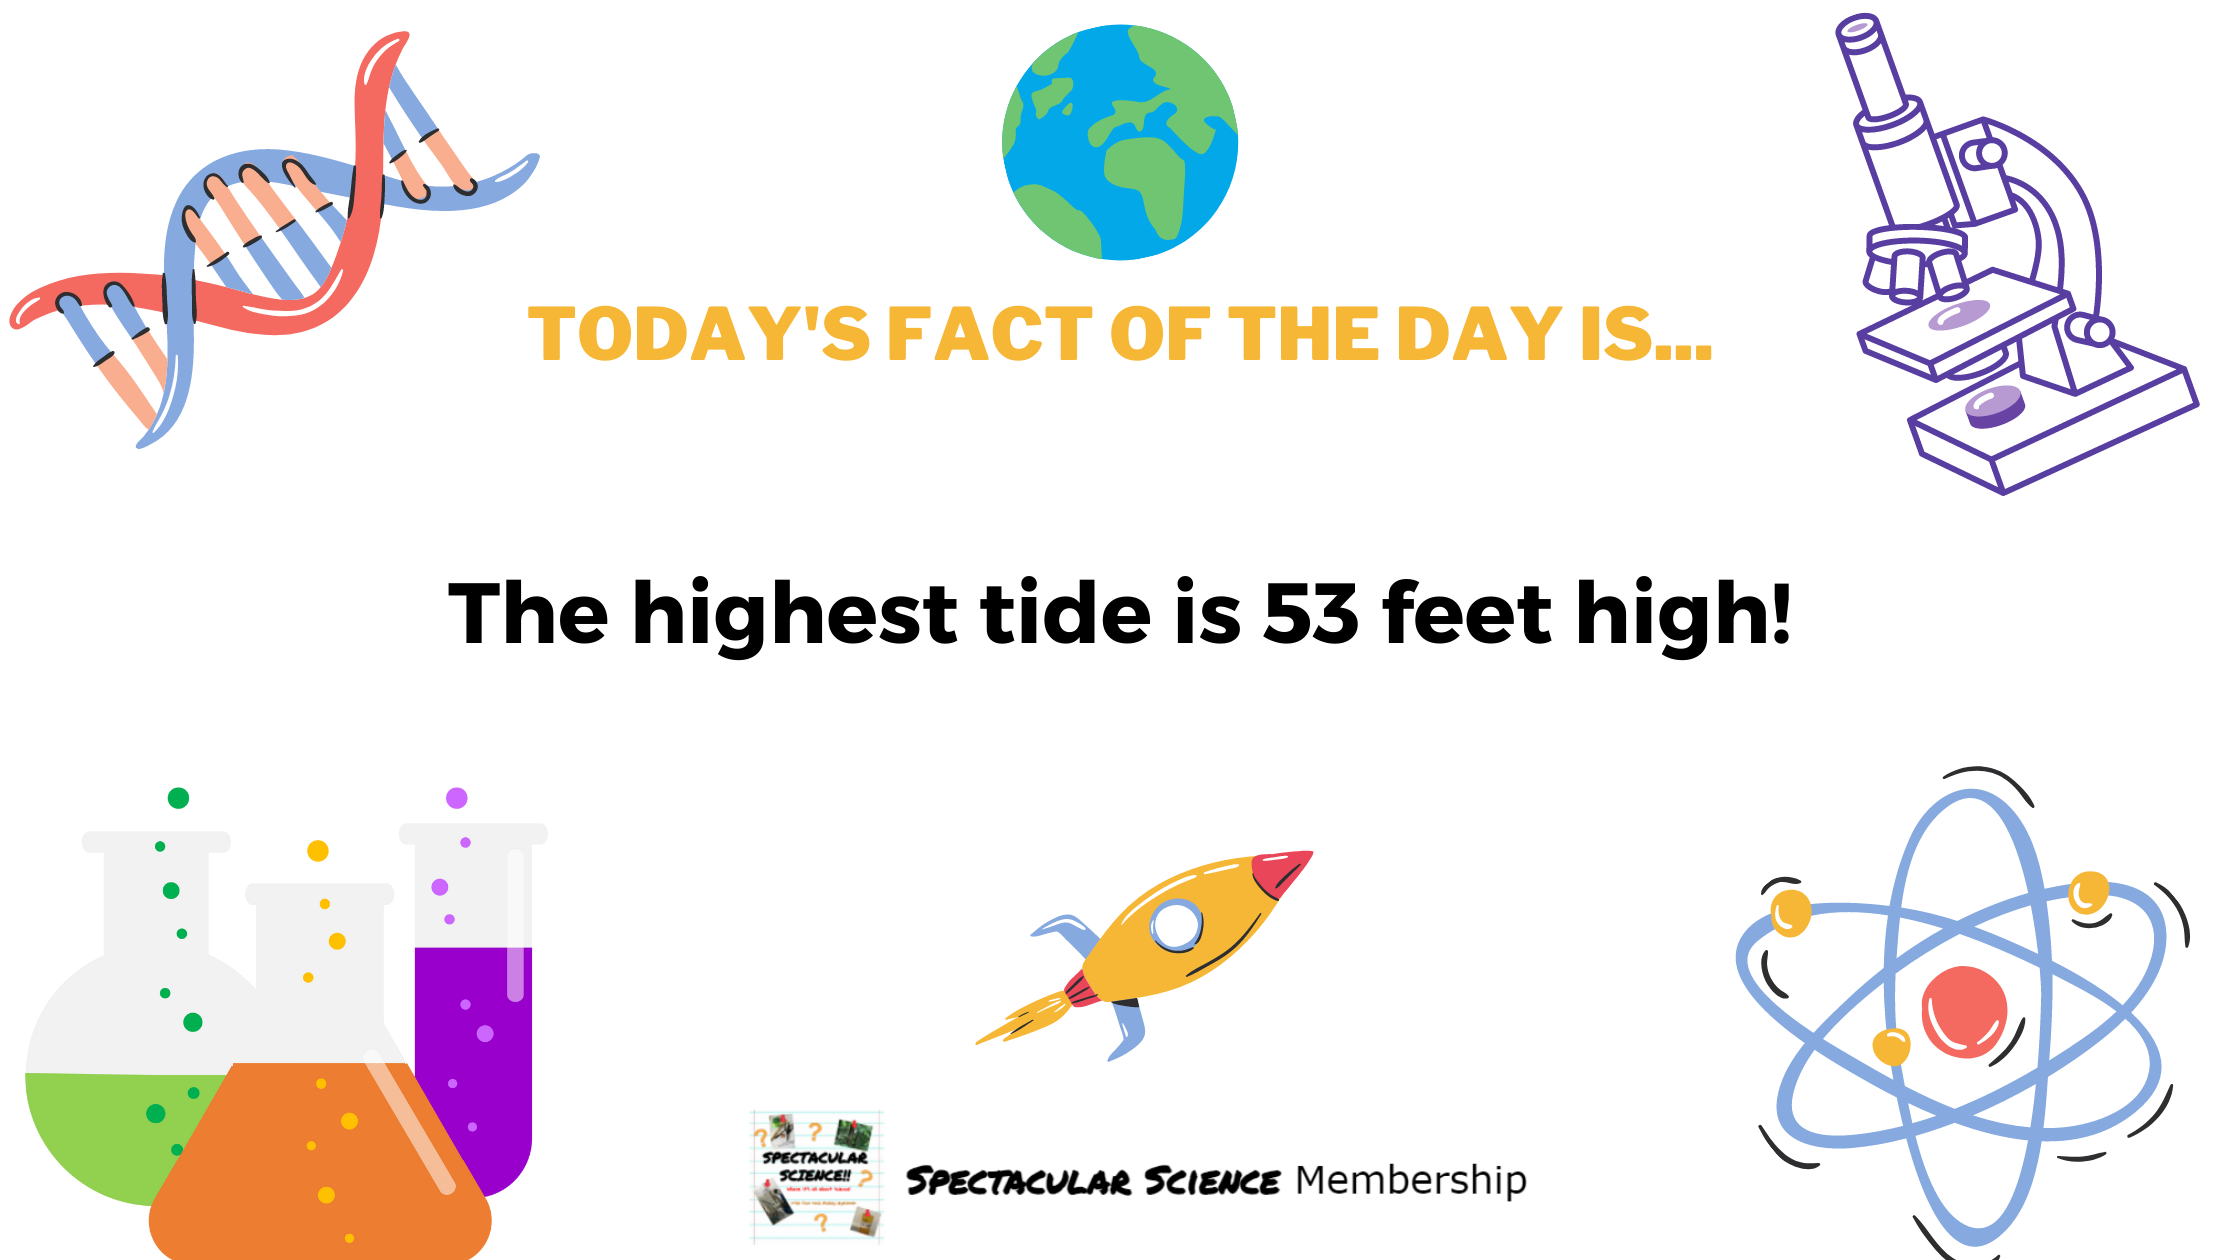 Fact of the Day Image Feb. 4th